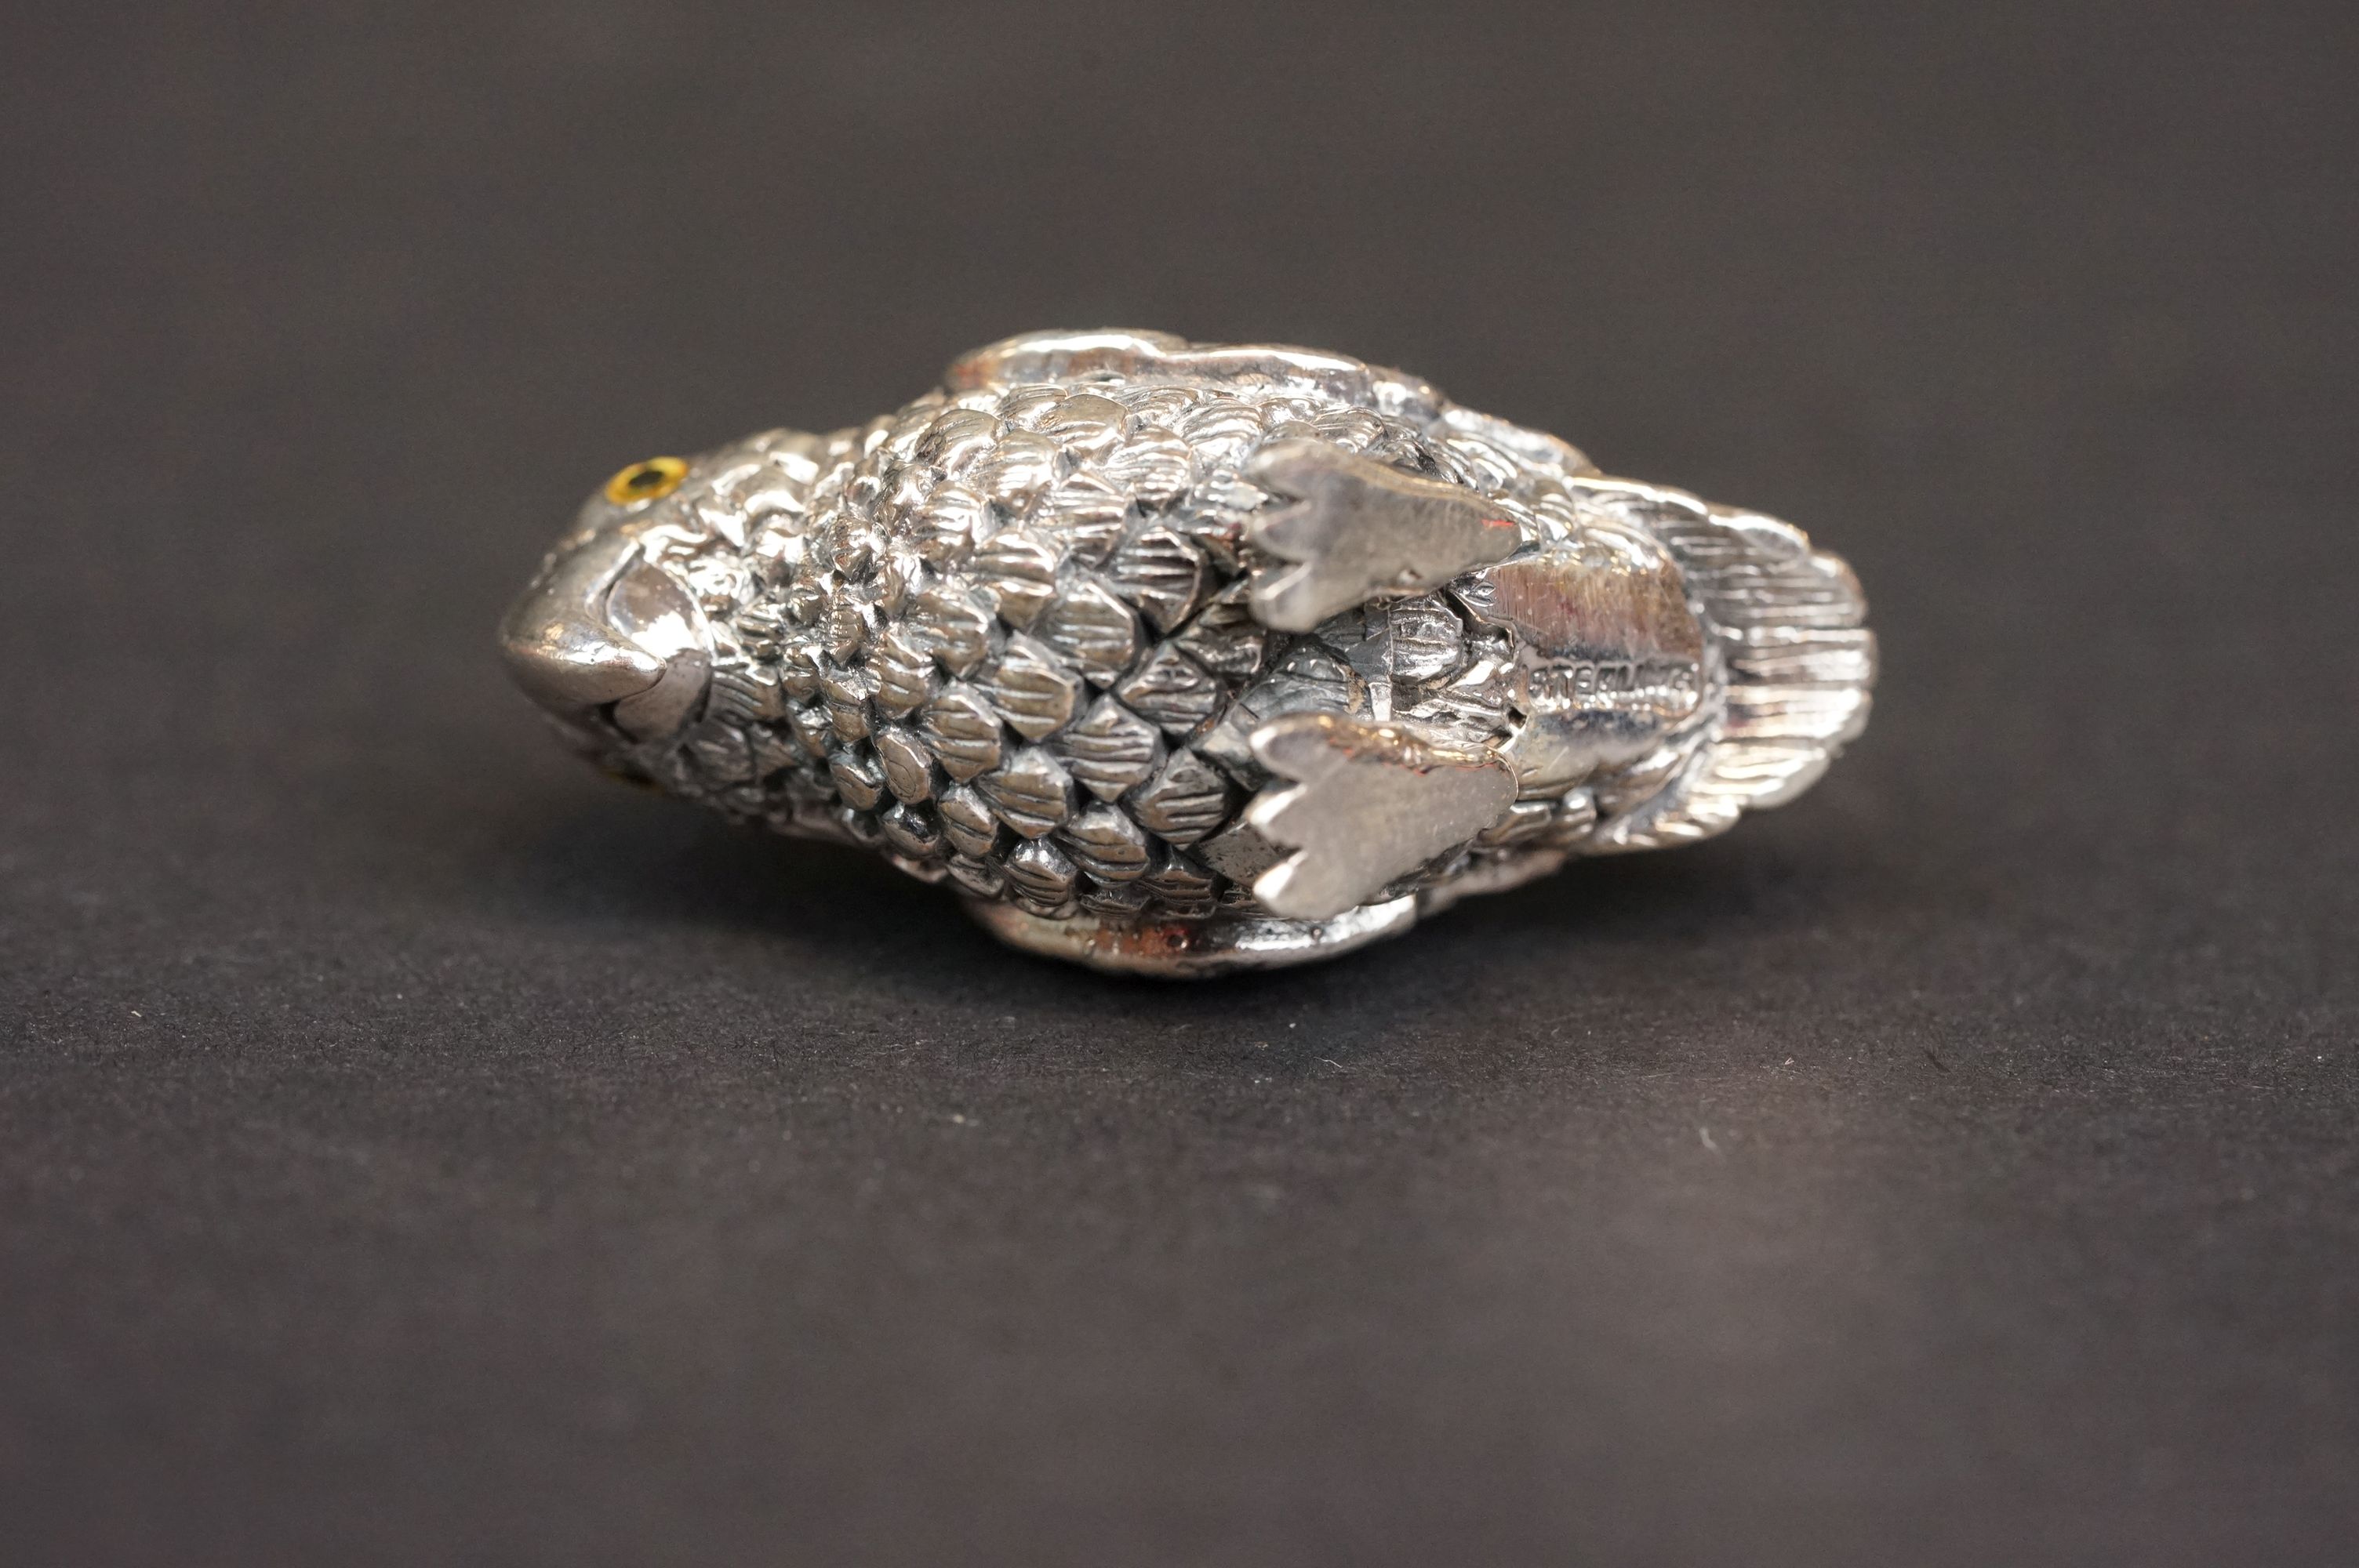 Solid silver figural parrot pincushion - Image 4 of 4